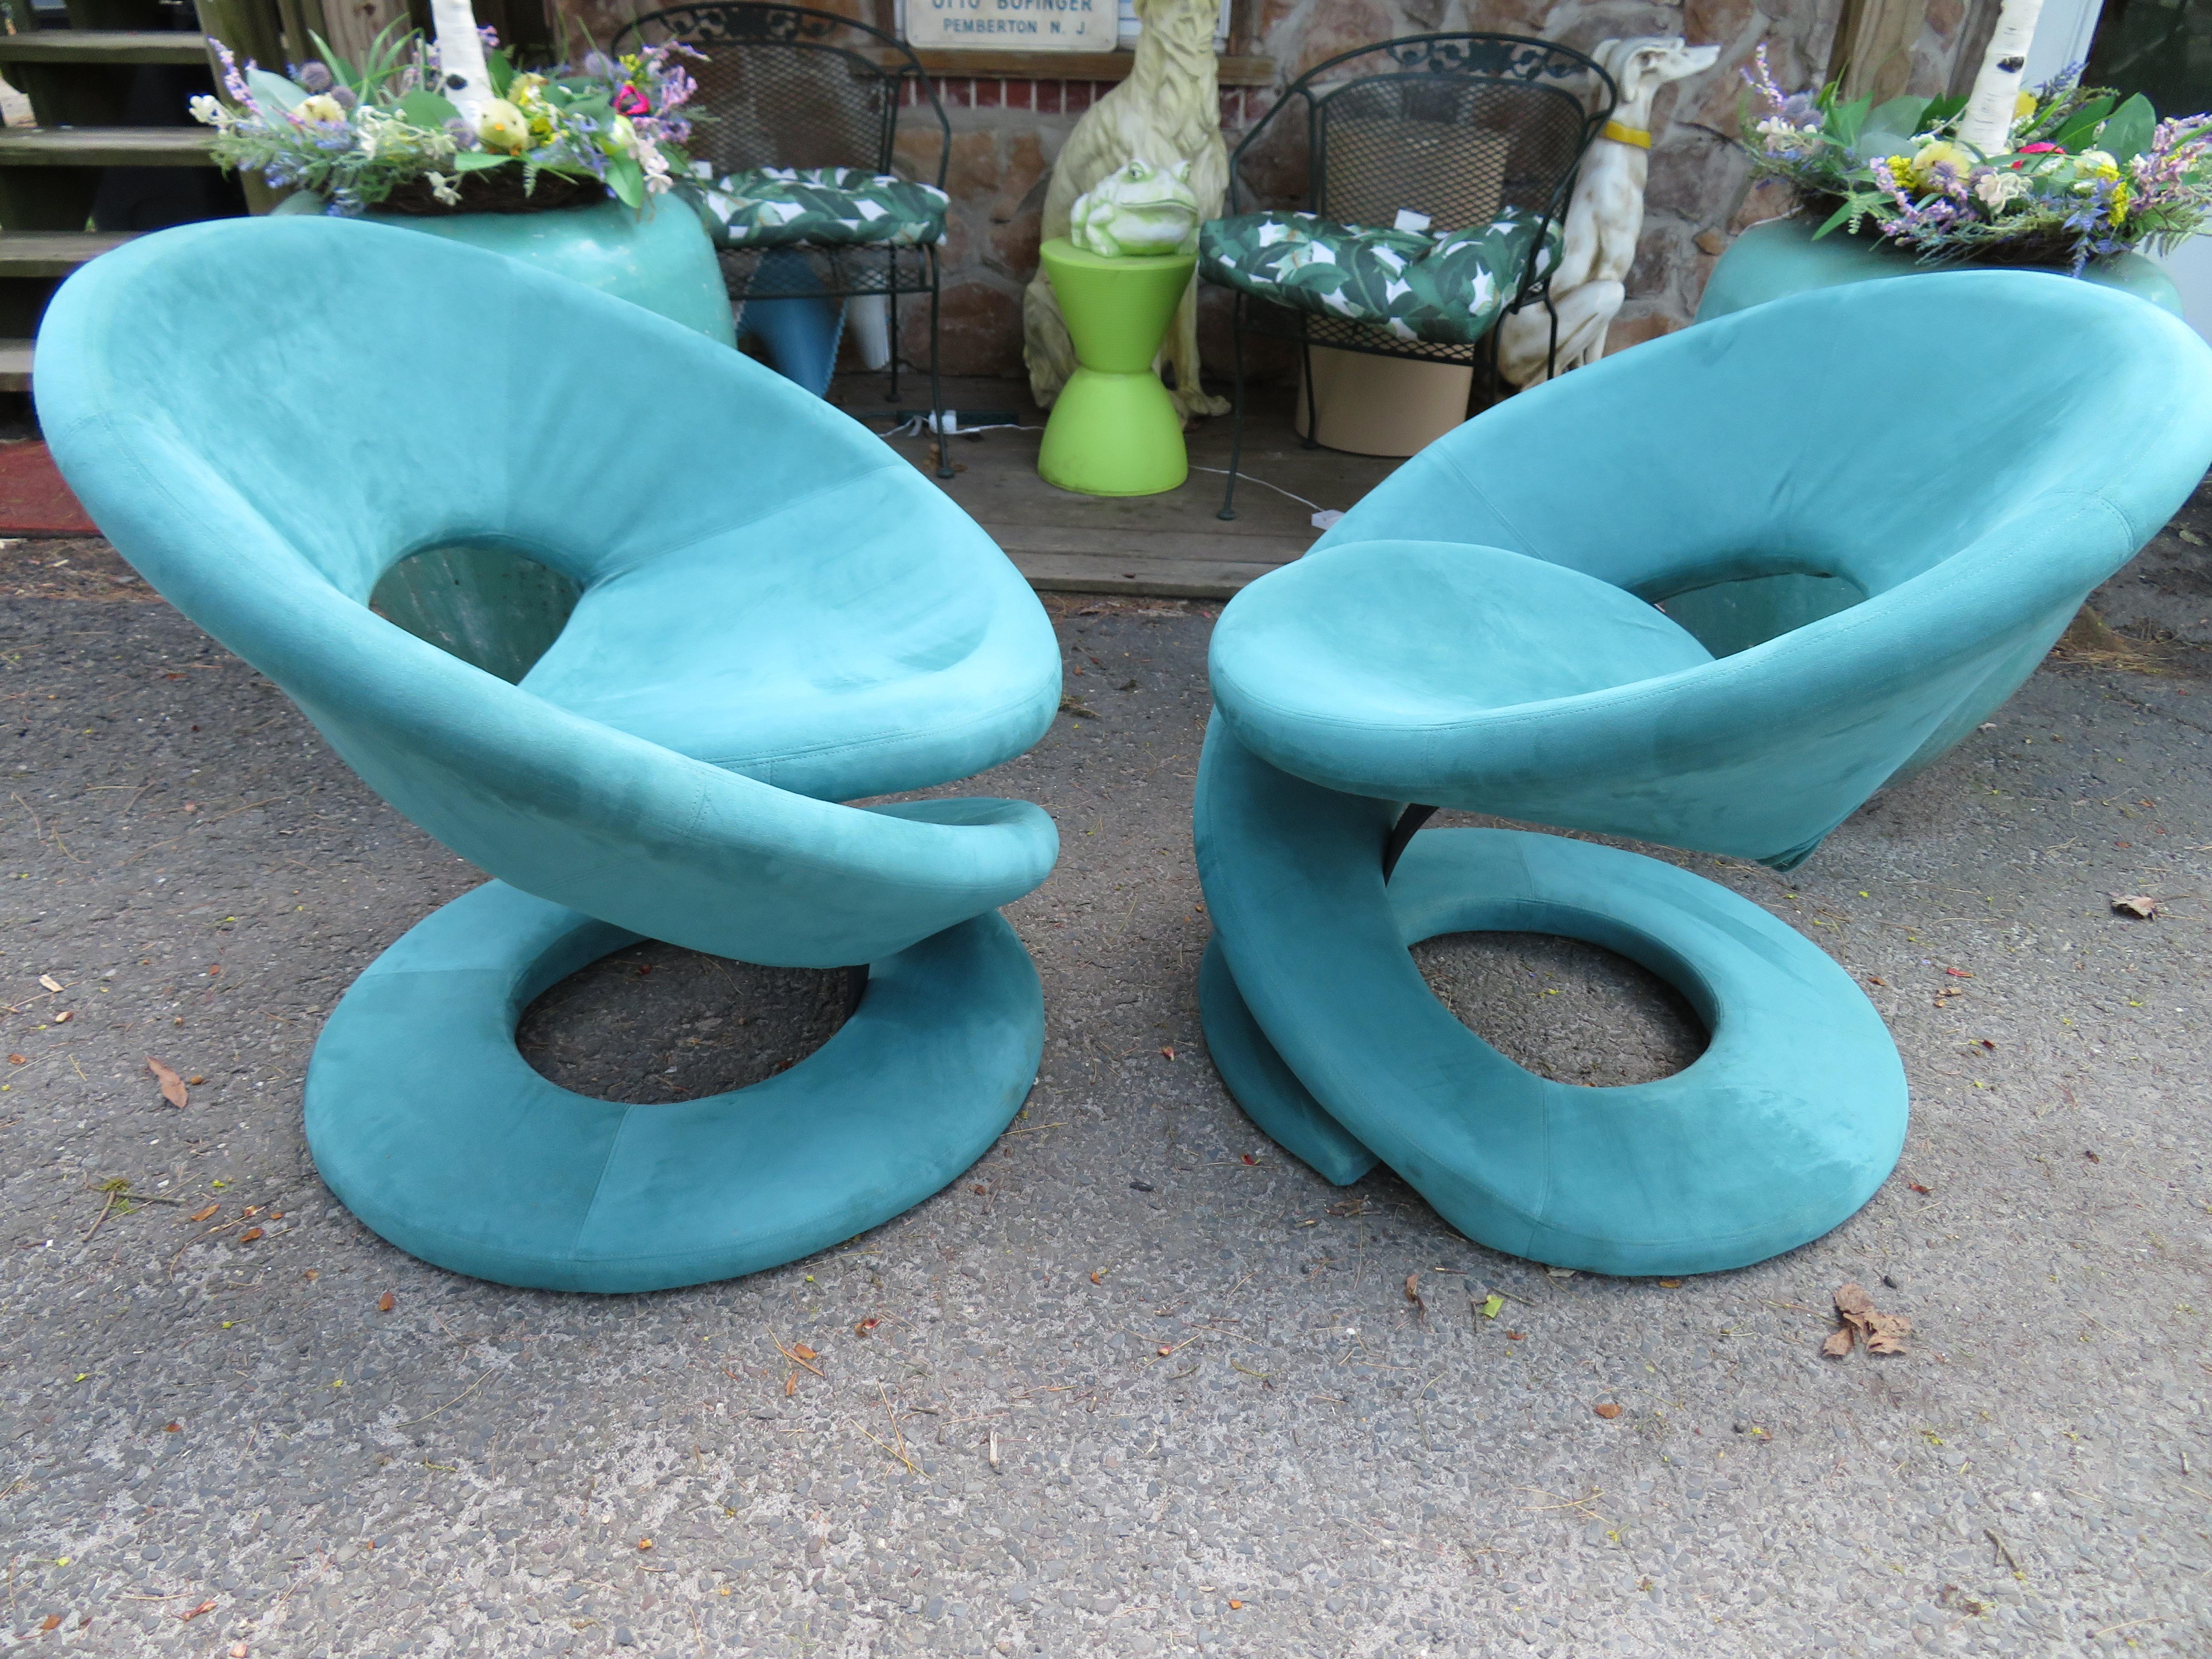 Sexy pair of corkscrew twist lounge chairs by Jaymar Furniture Quebec 69 Made in Canada. These chairs are in nice vintage condition with light age appropriate wear. They retain their original Tiffany box blue ultra-suede in useable condition-light